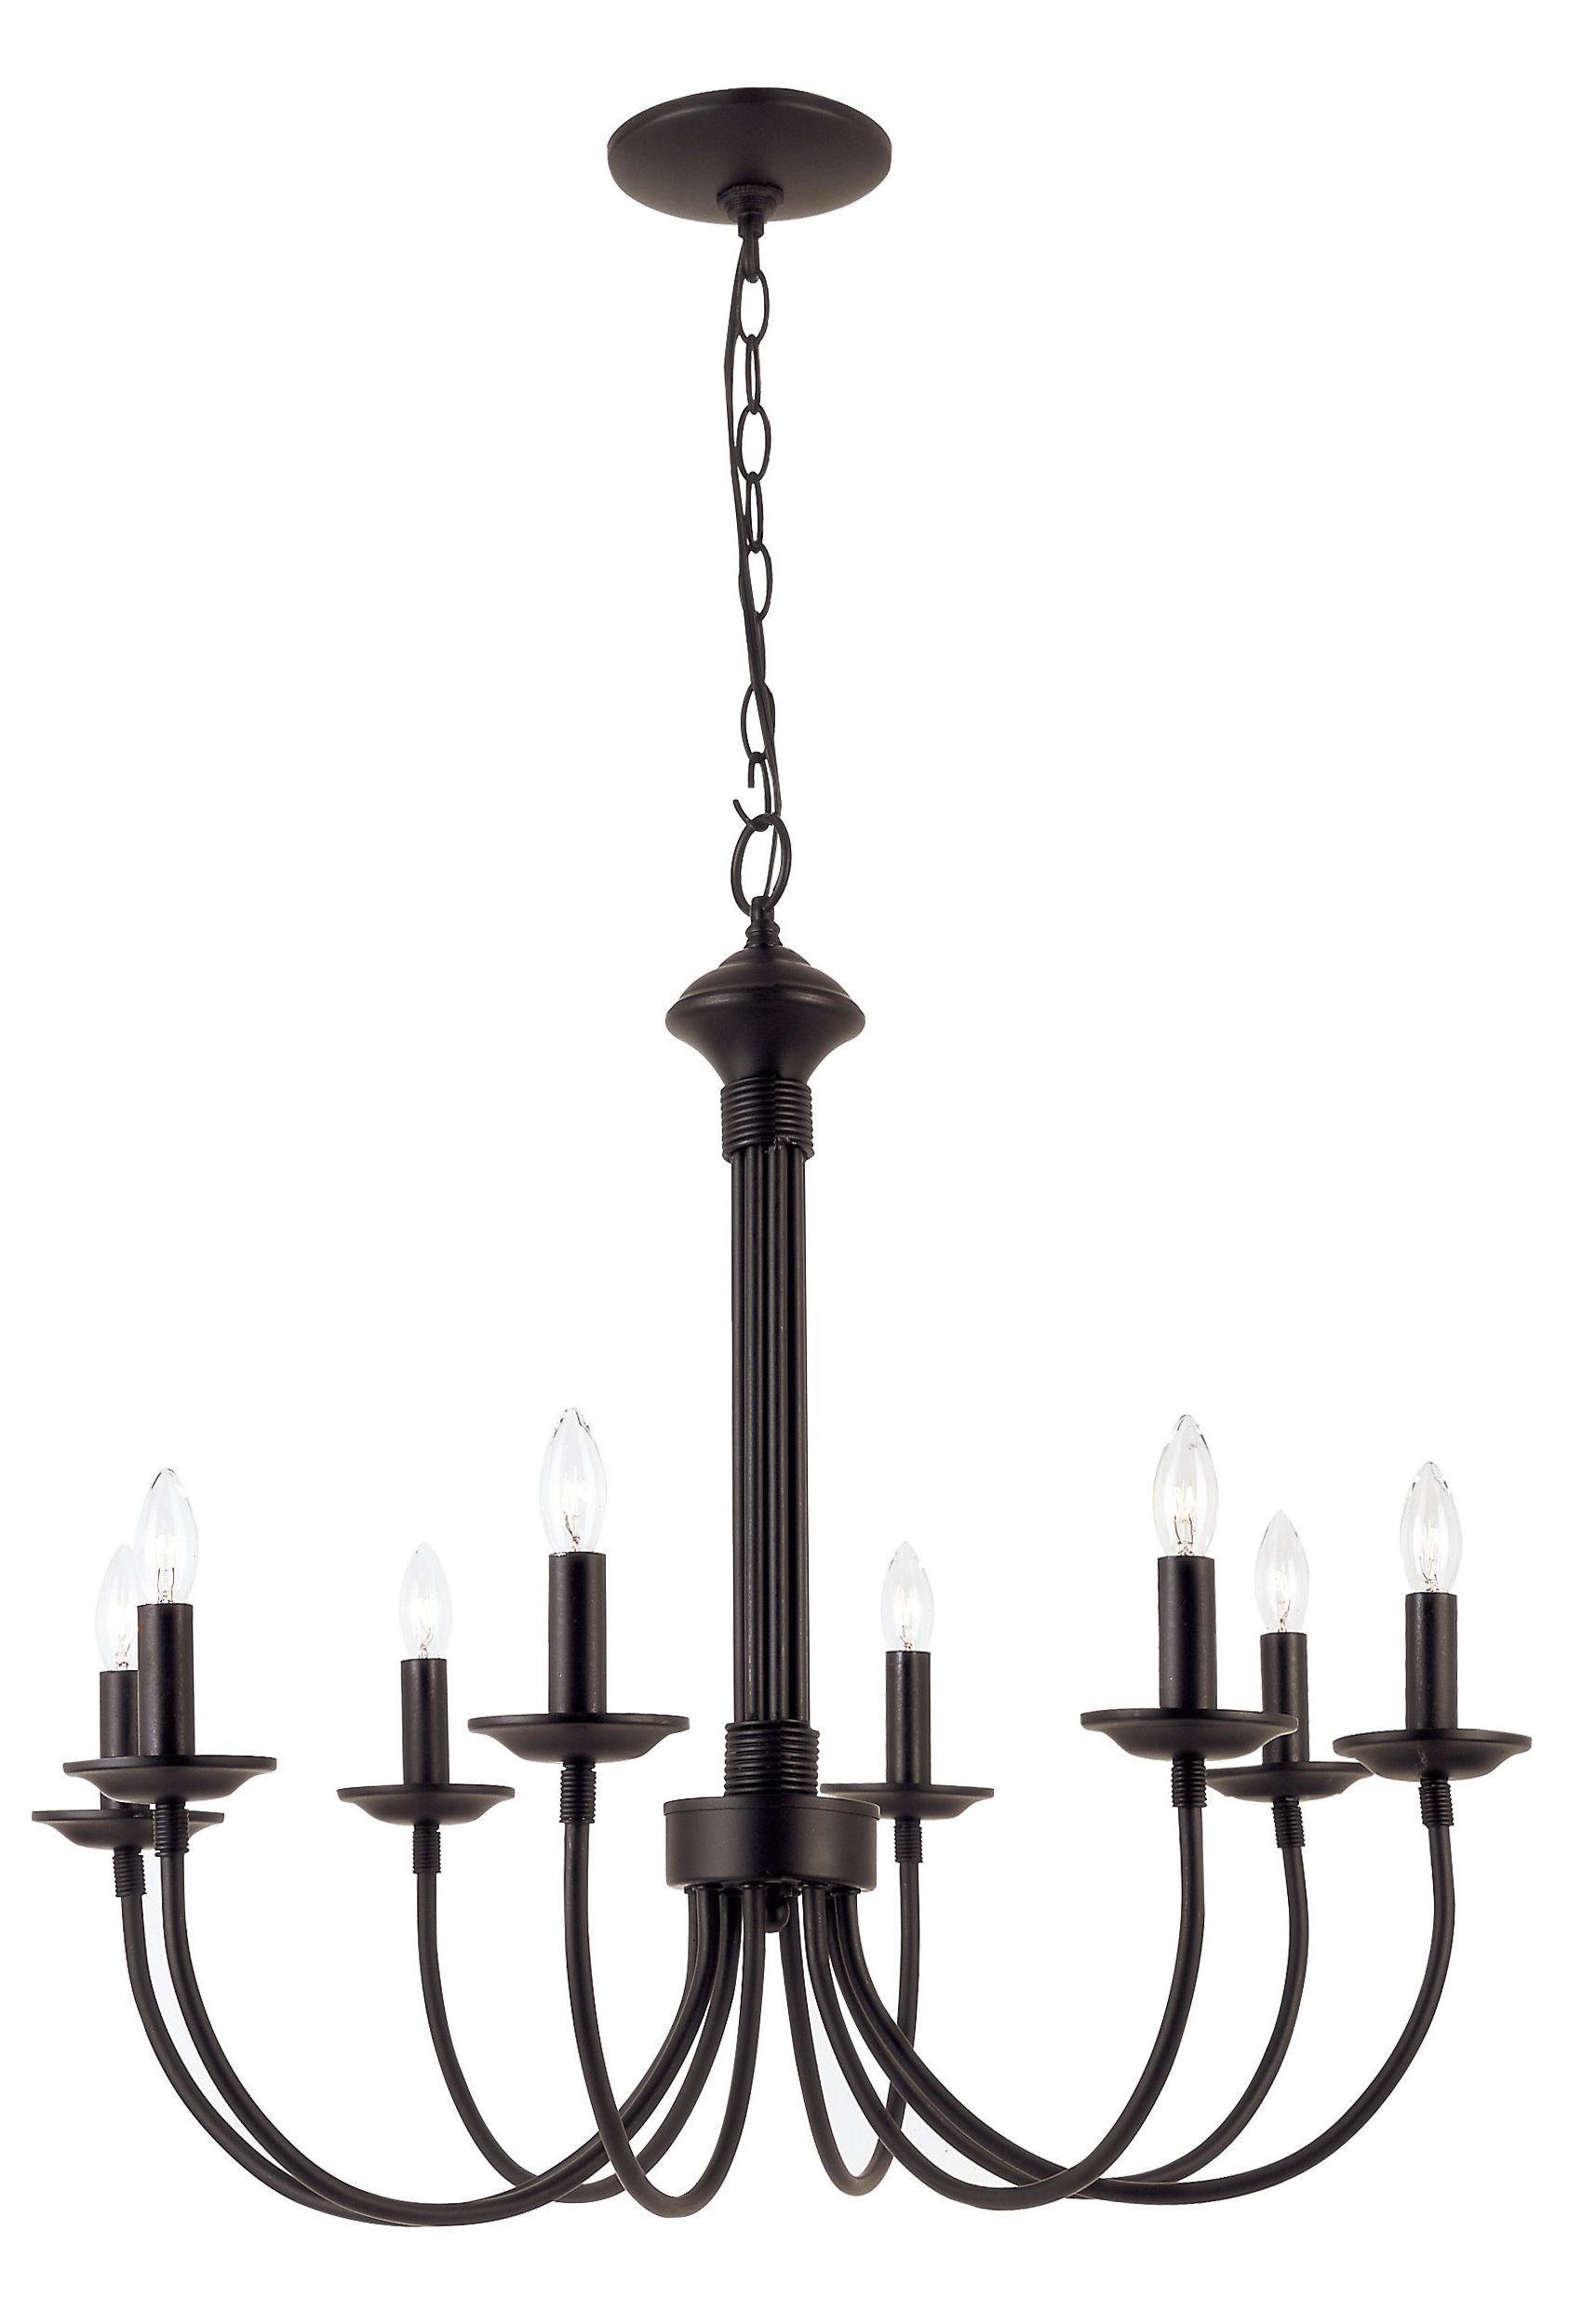 Most Up To Date Shaylee 8 Light Candle Style Chandelier Intended For Shaylee 6 Light Candle Style Chandeliers (View 6 of 20)